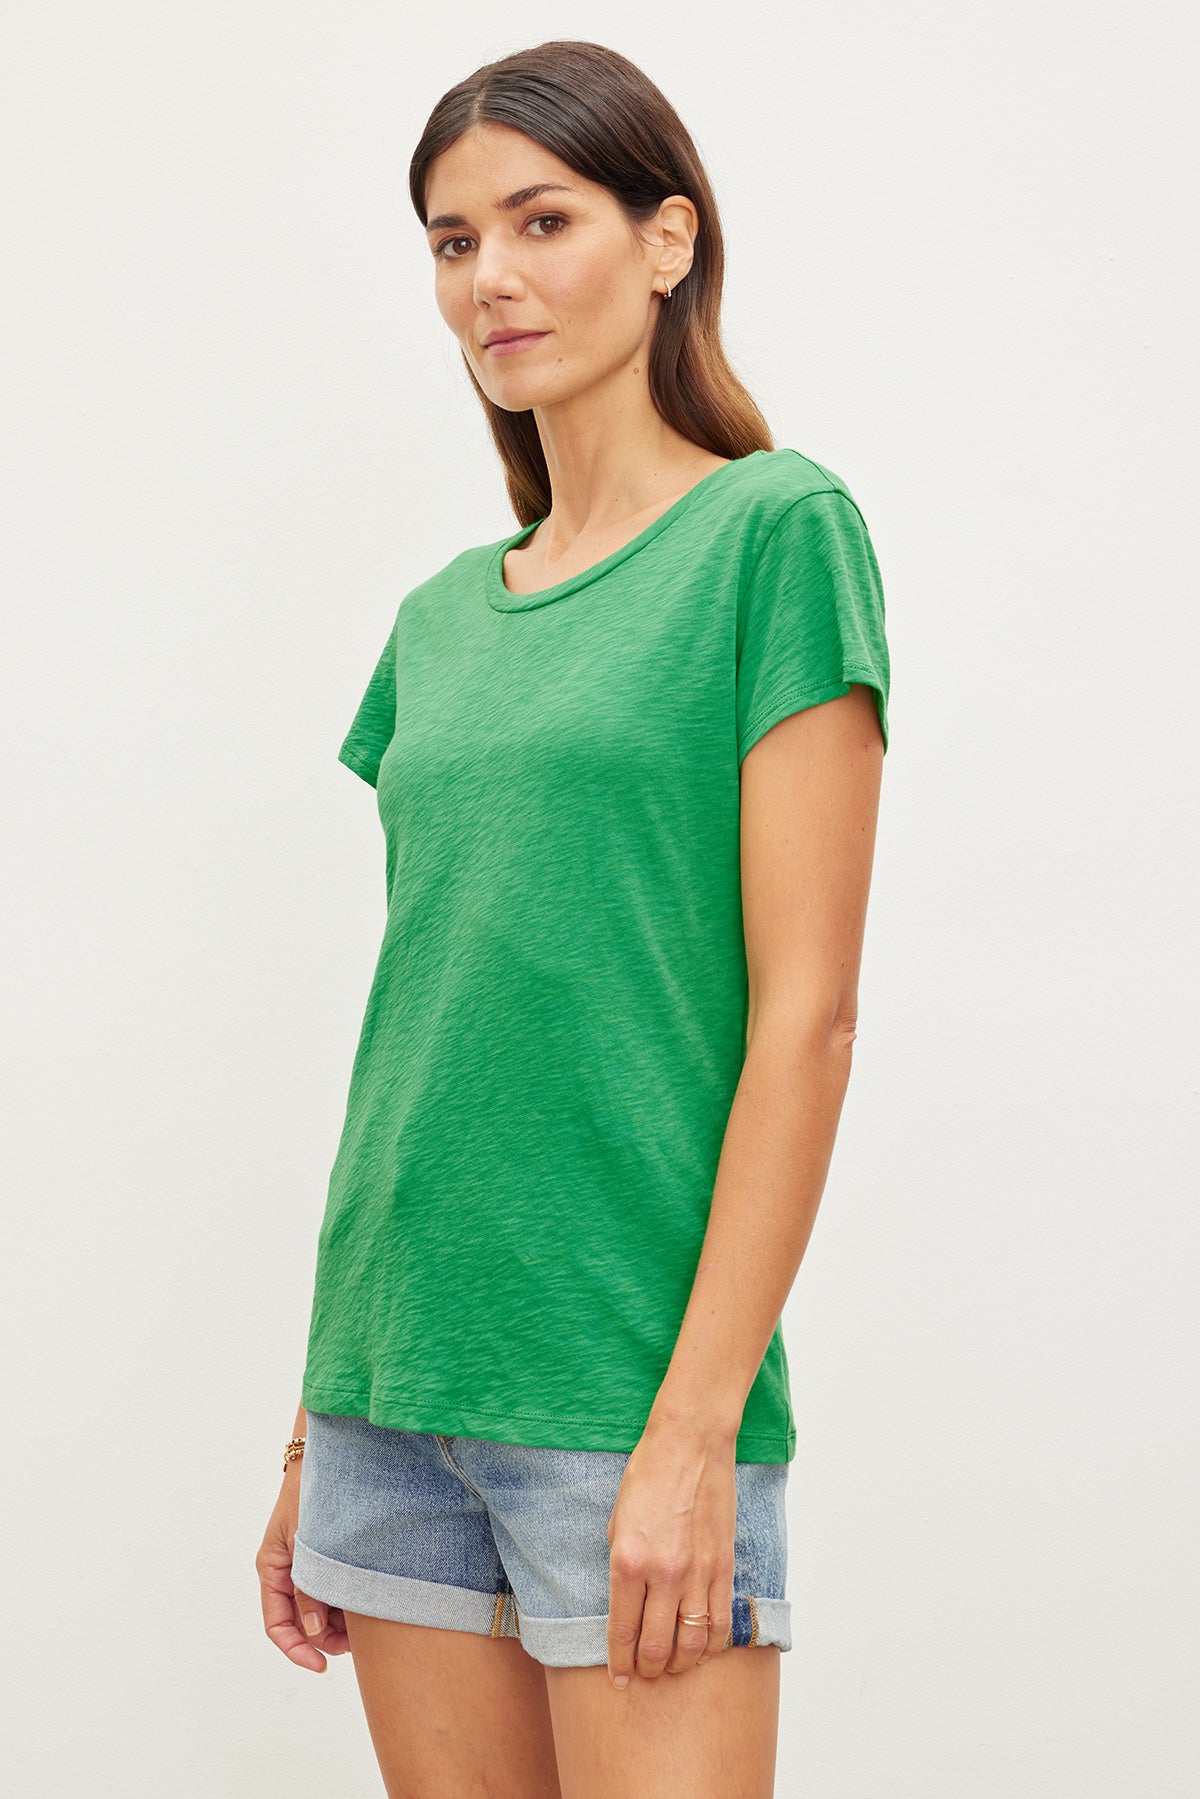 LAYNE LIGHT STRUCTURED COTTON CREW NECK MUSCLE TEE – Velvet by